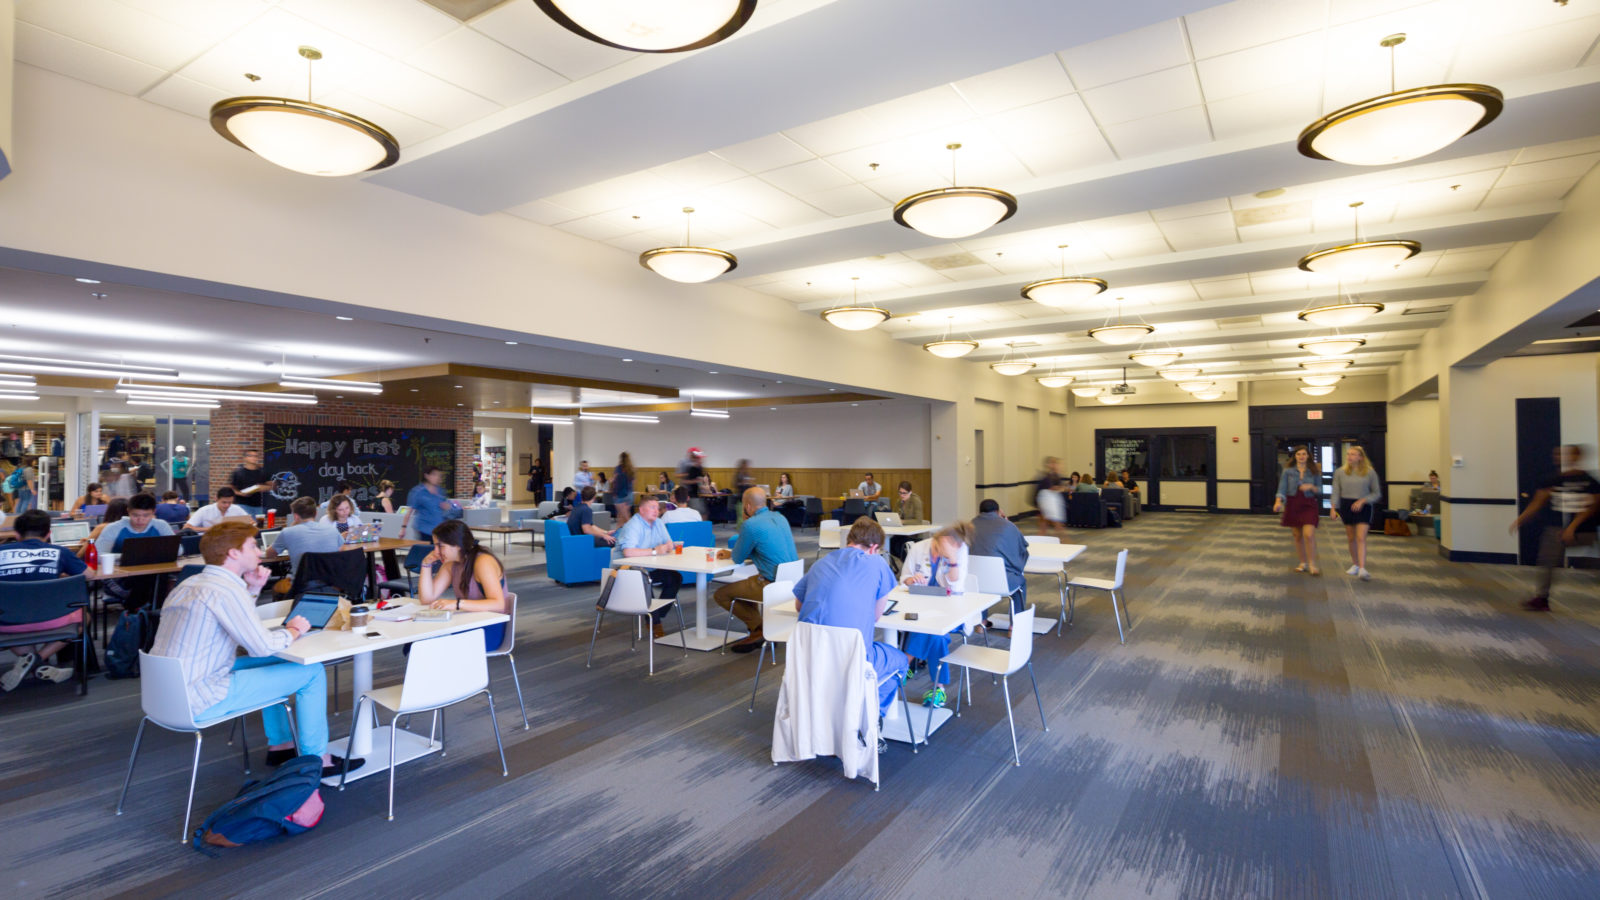 Students are pictured studying in the Leavey Center at different tables.